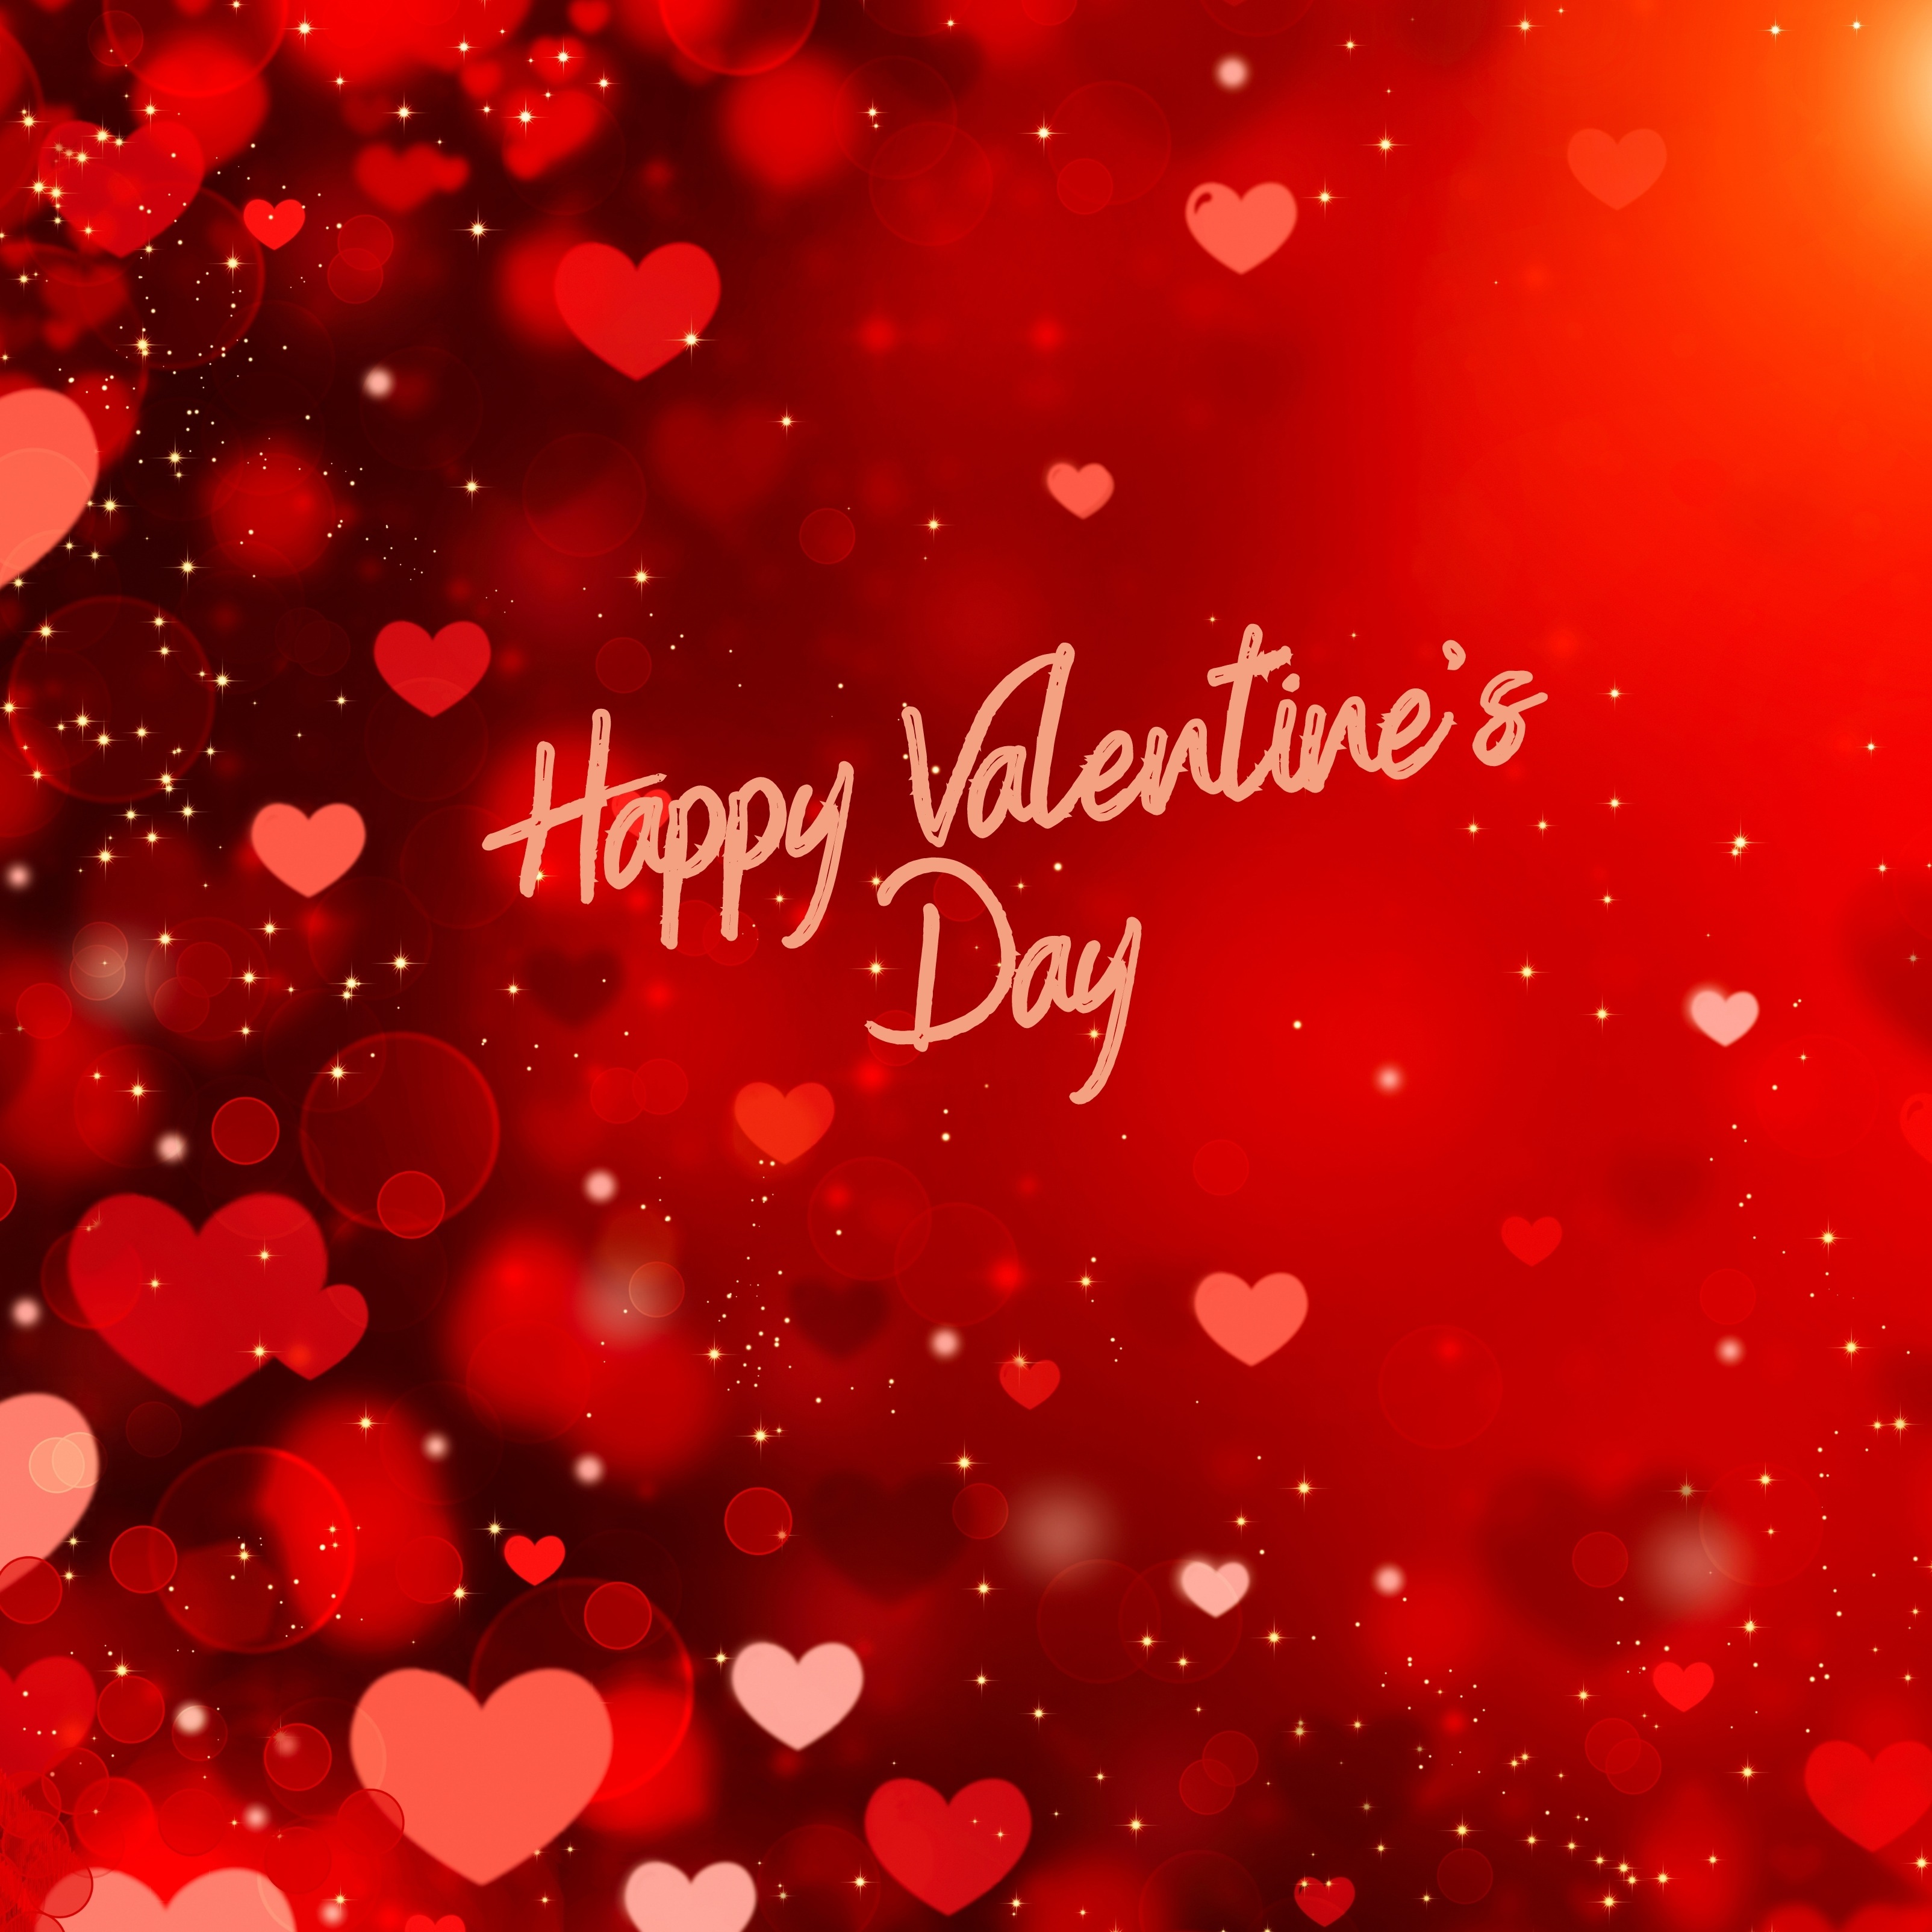 iPad Wallpapers Happy Valentines Day 2021 Love Hearts Background iPad Wallpaper 3208x3208 px